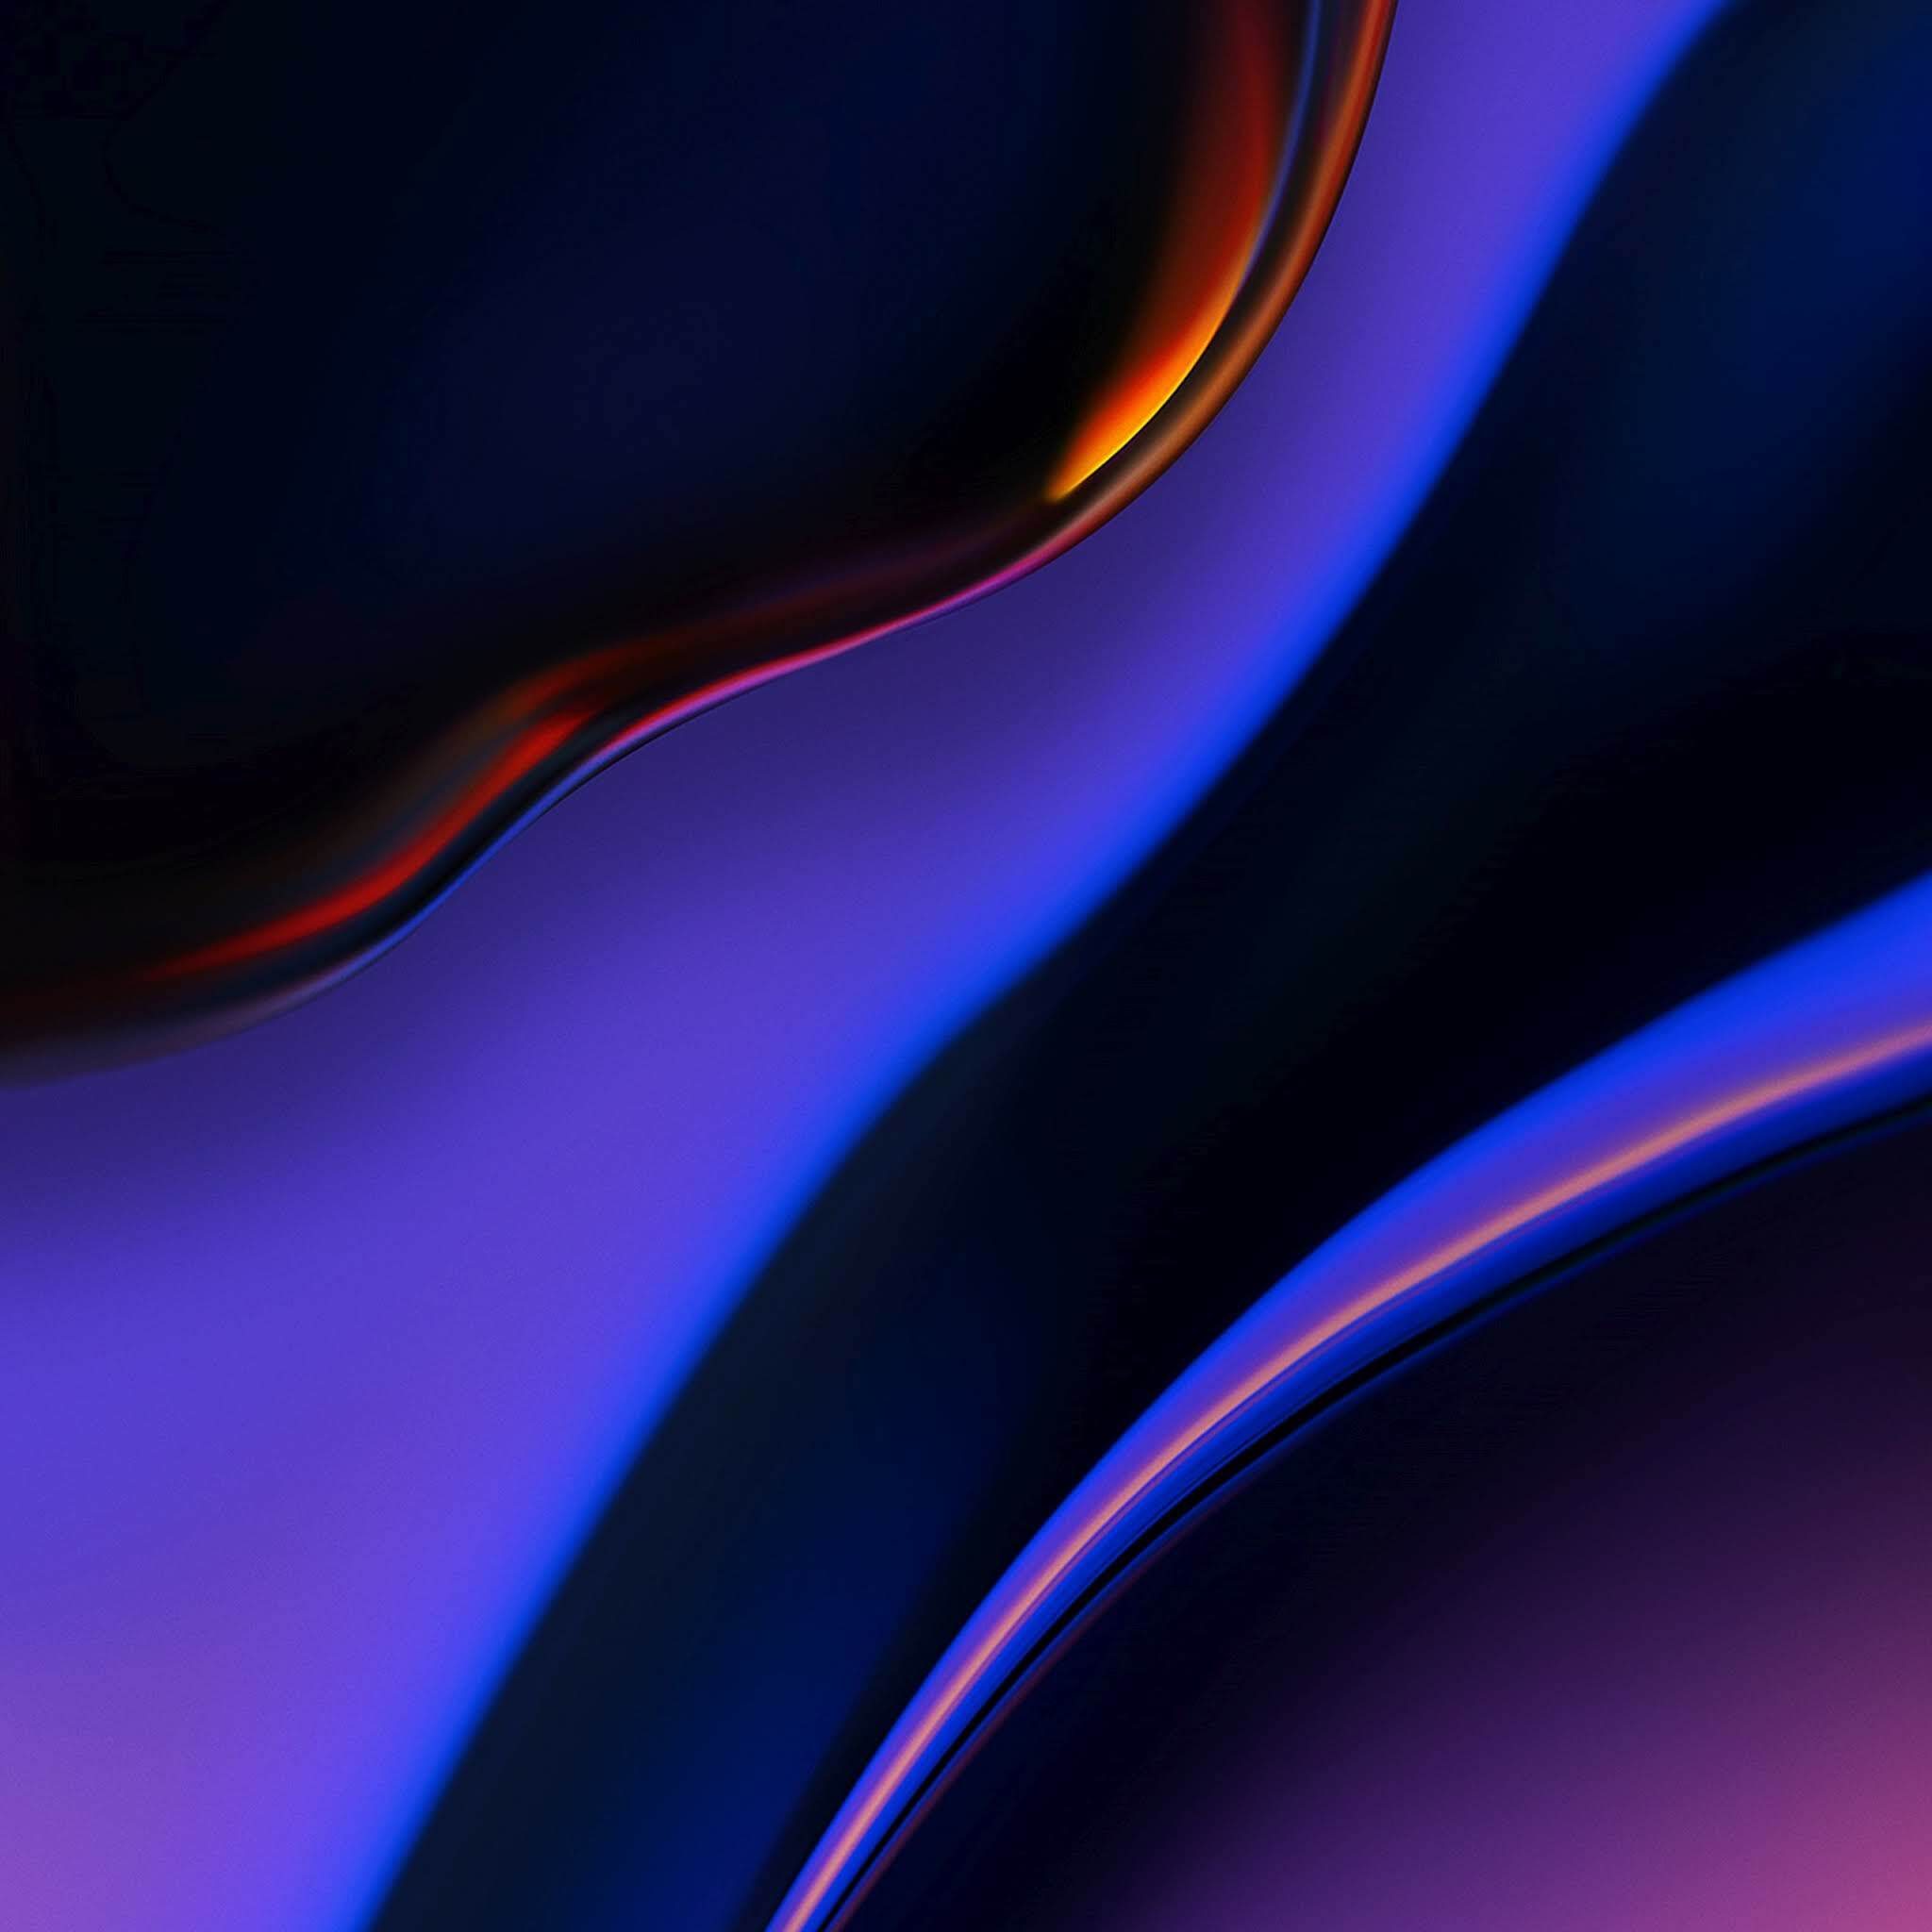 Galaxy Tab S4 Wallpapers - Top Free Galaxy Tab S4 Backgrounds ...